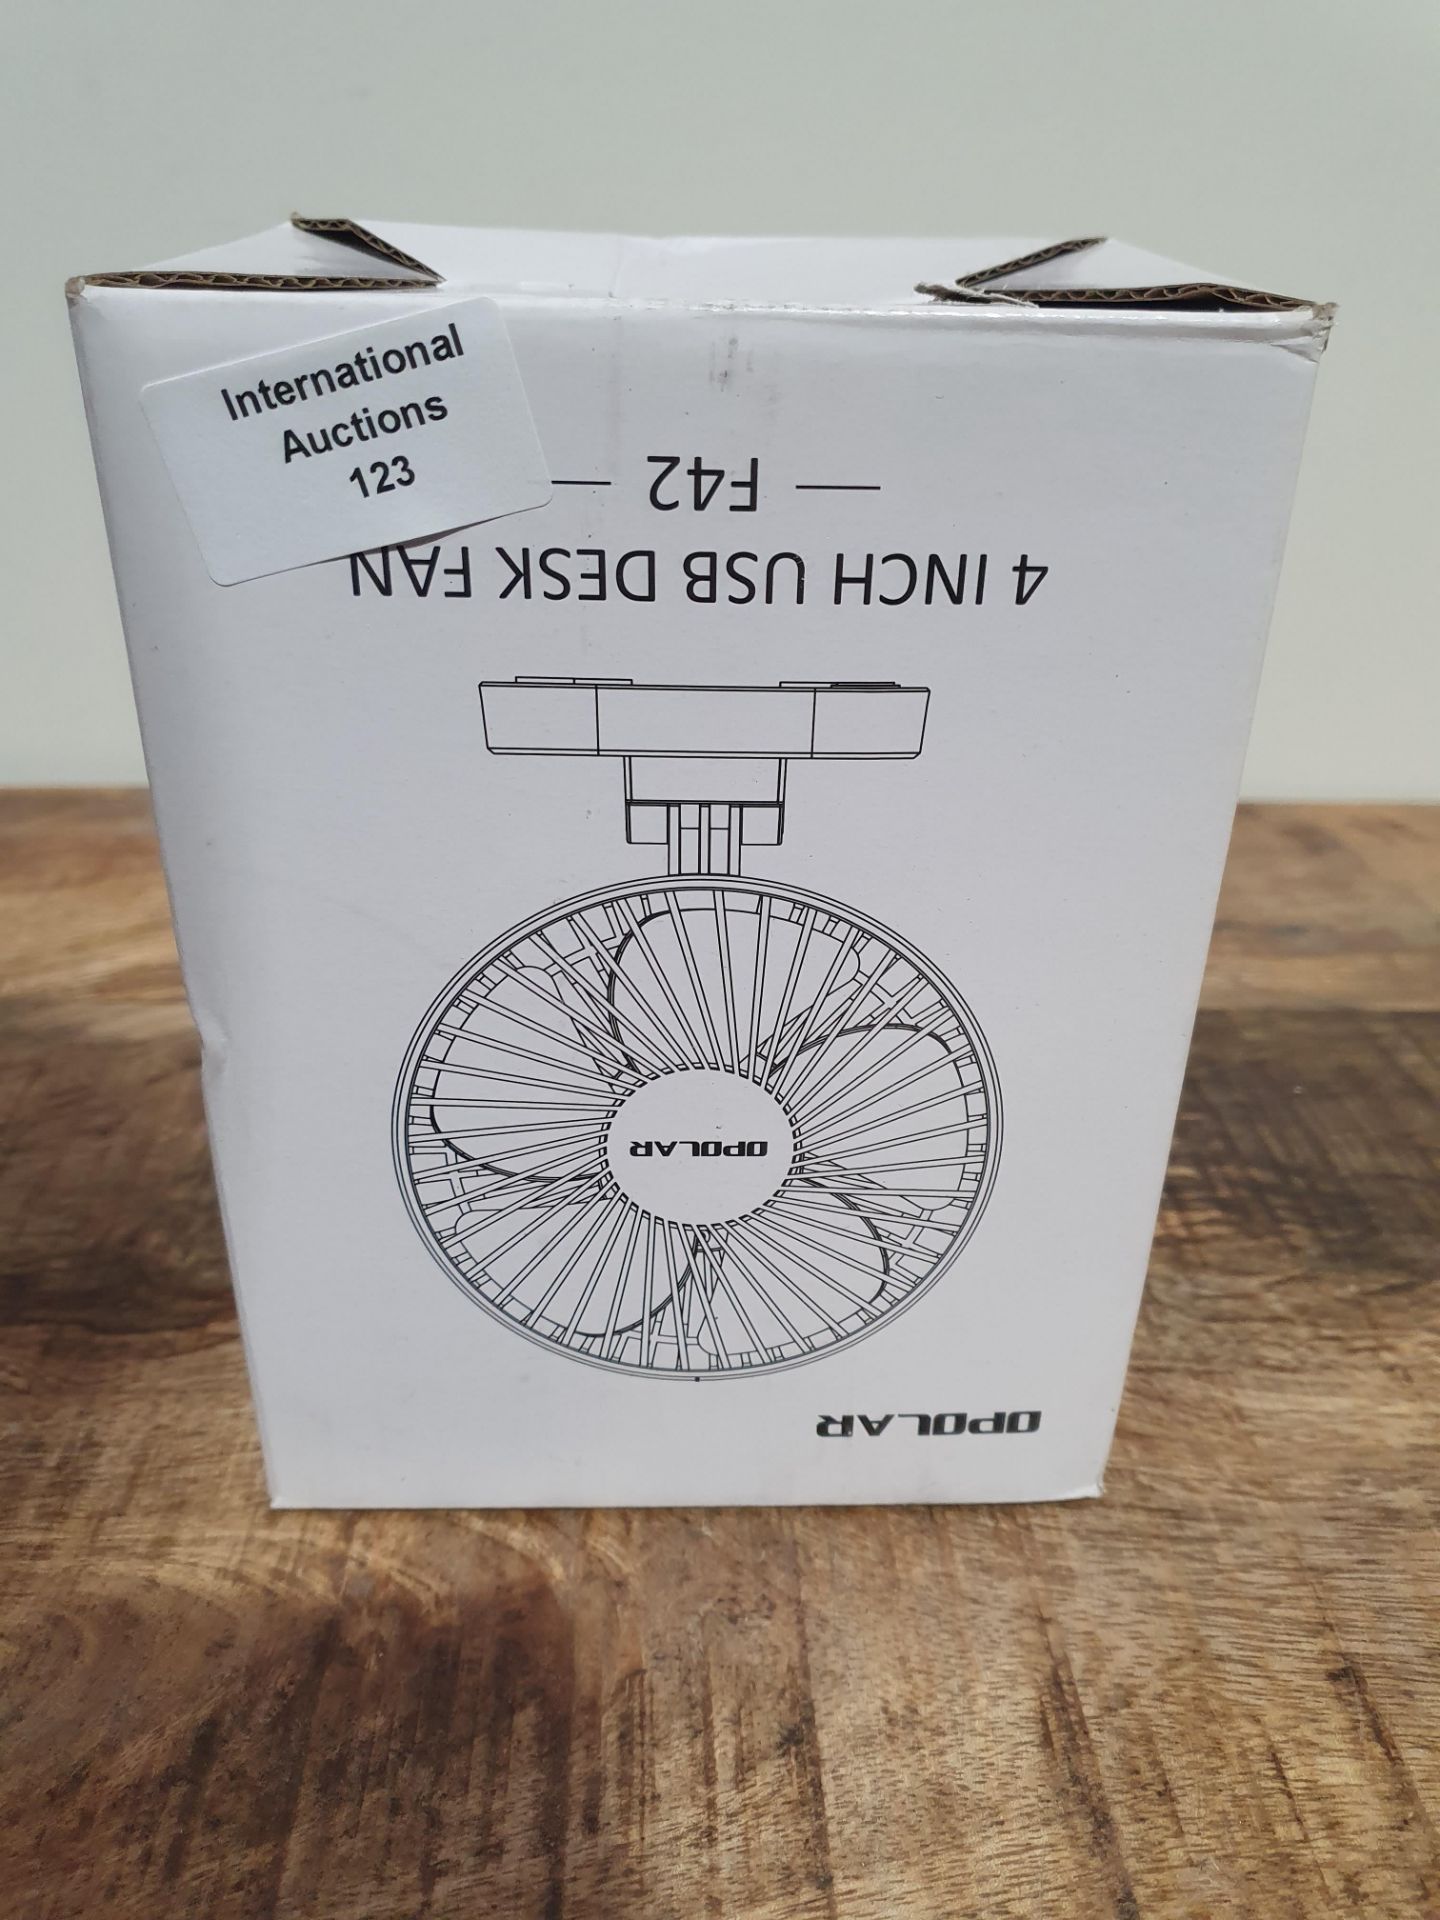 OPOLAR 4 INCH USB DESK FAN RRP £15Condition ReportAppraisal Available on Request - All Items are